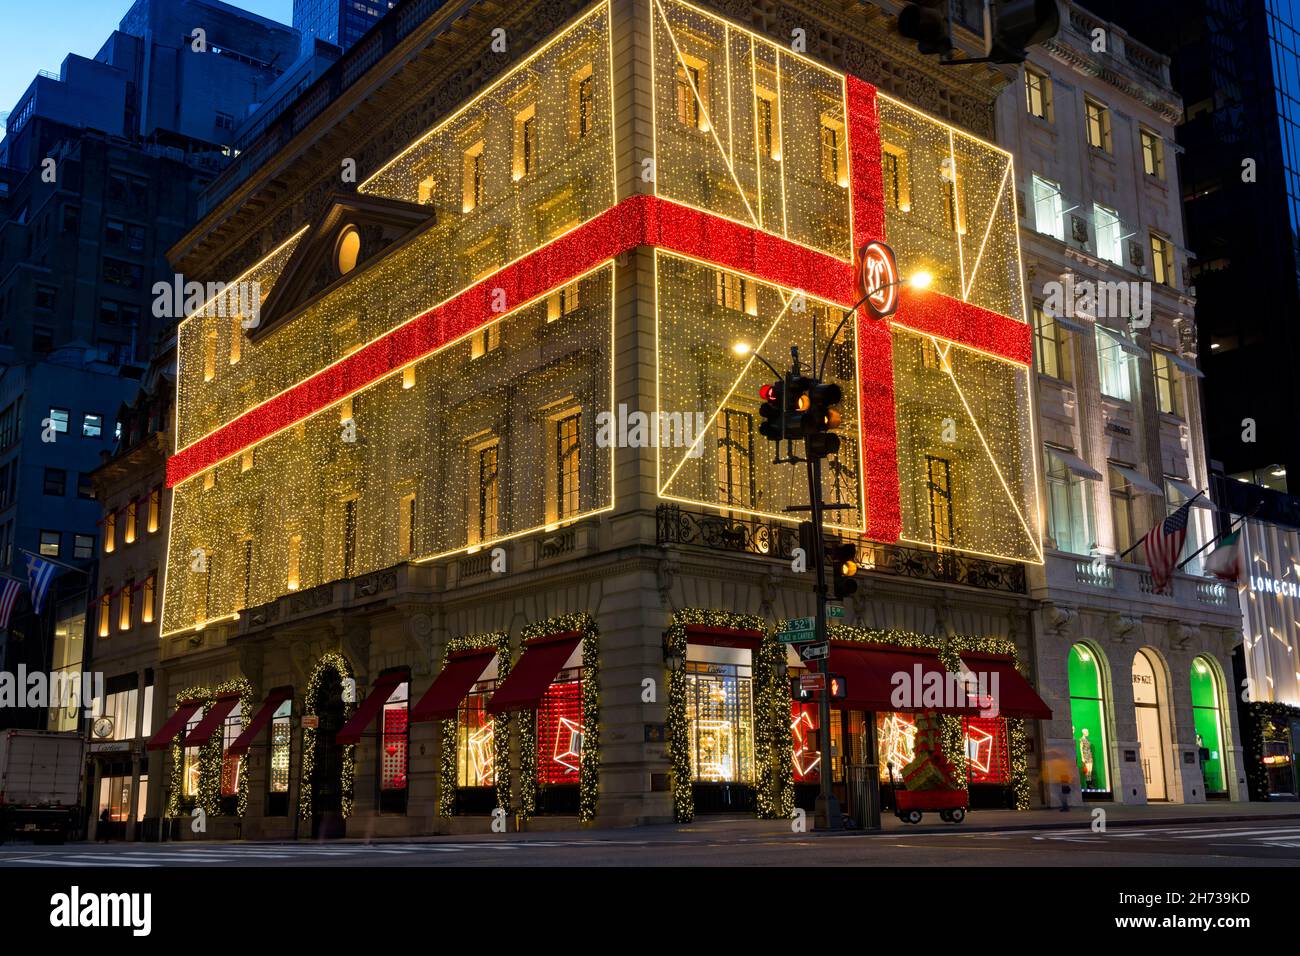 Cartier Store on 5th Avenue decorated for the holidays, New York